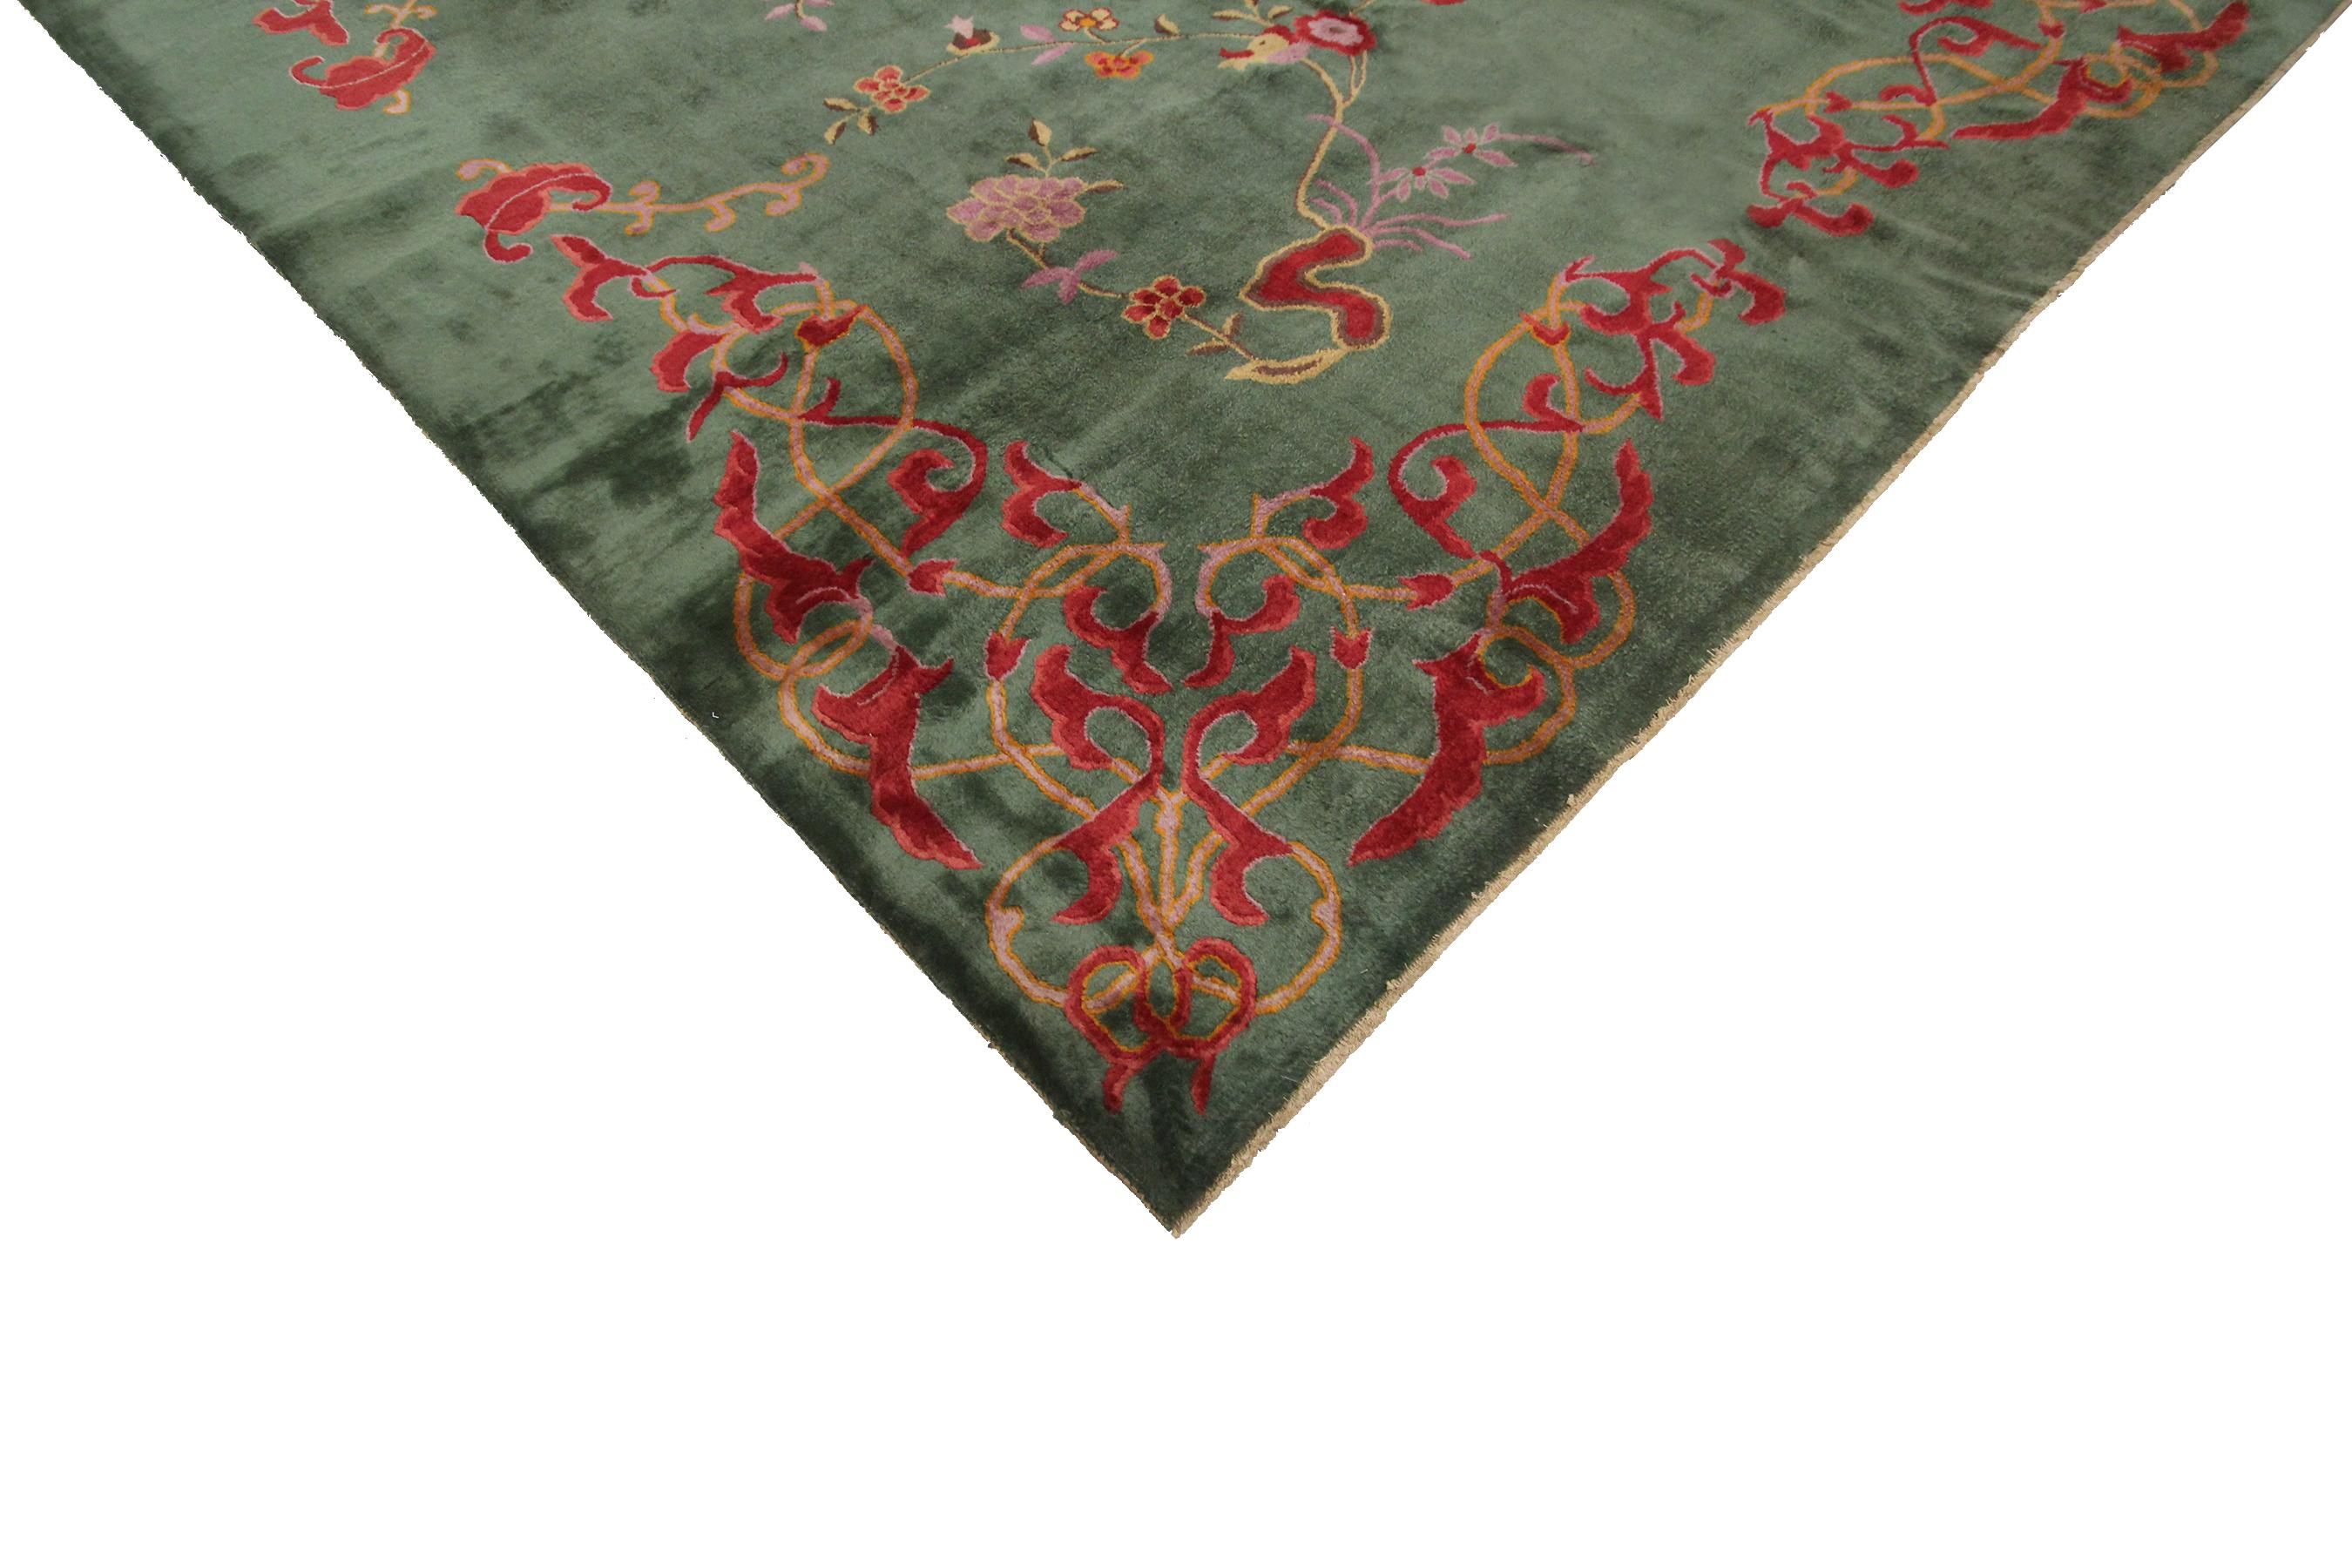 Wool Antique Art Deco Chinese Rug Antique Chinese Rug Antique Art Deco Rug Green